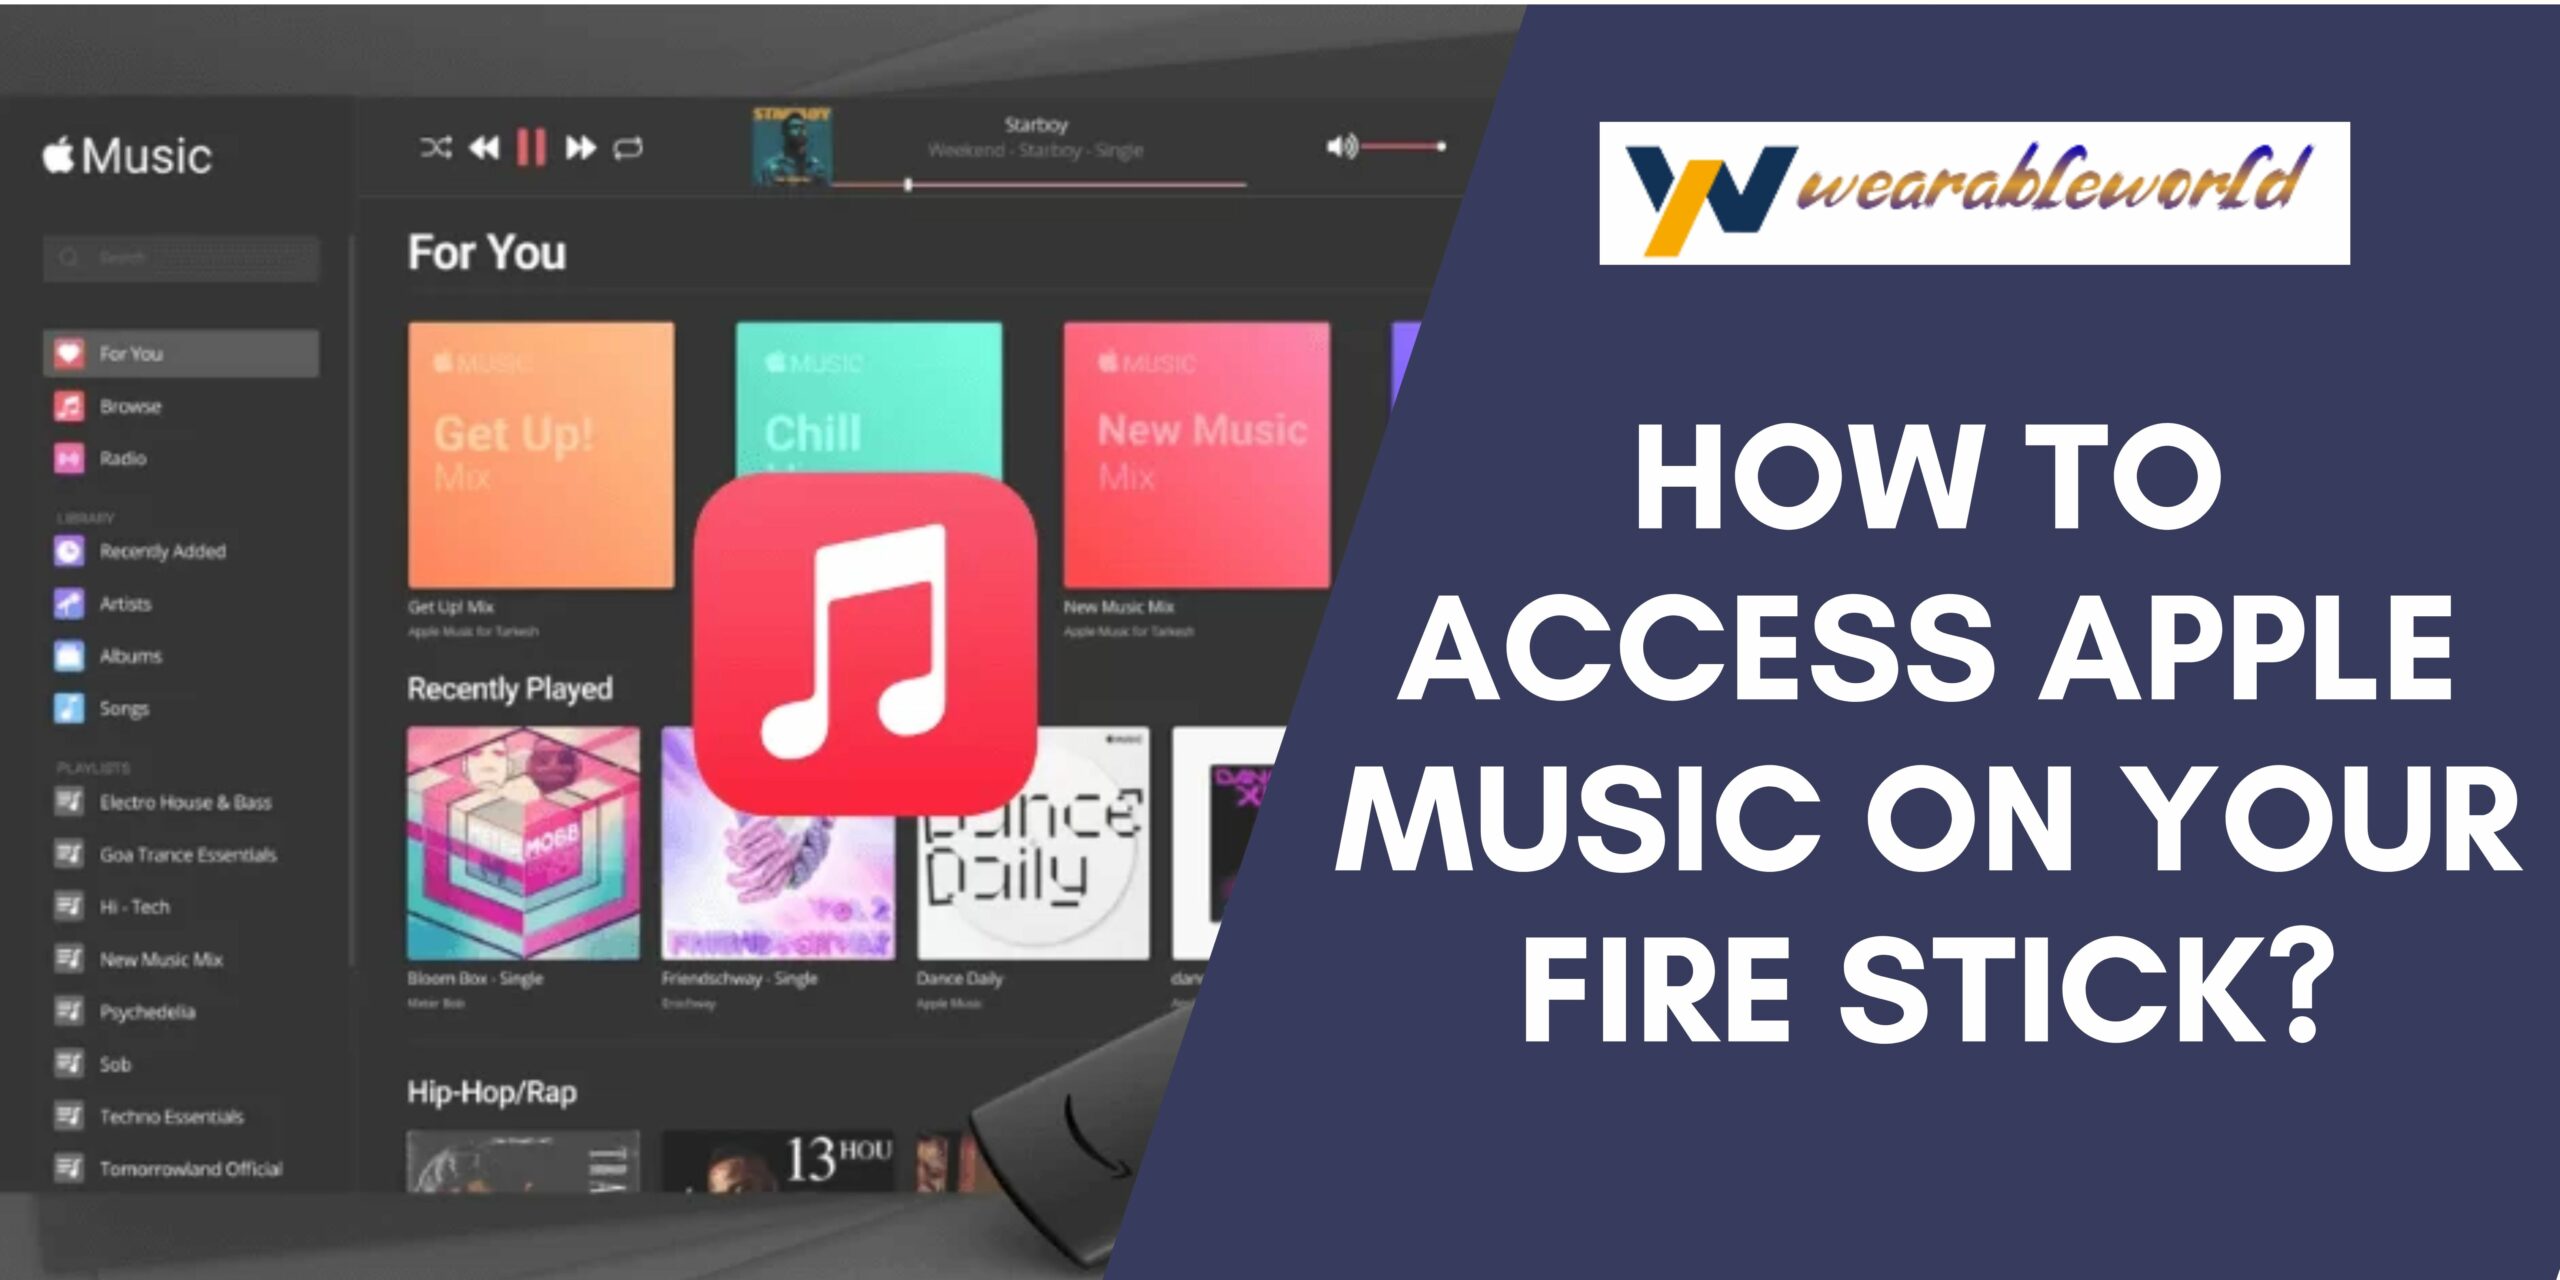 Access Apple Music on your Fire Stick